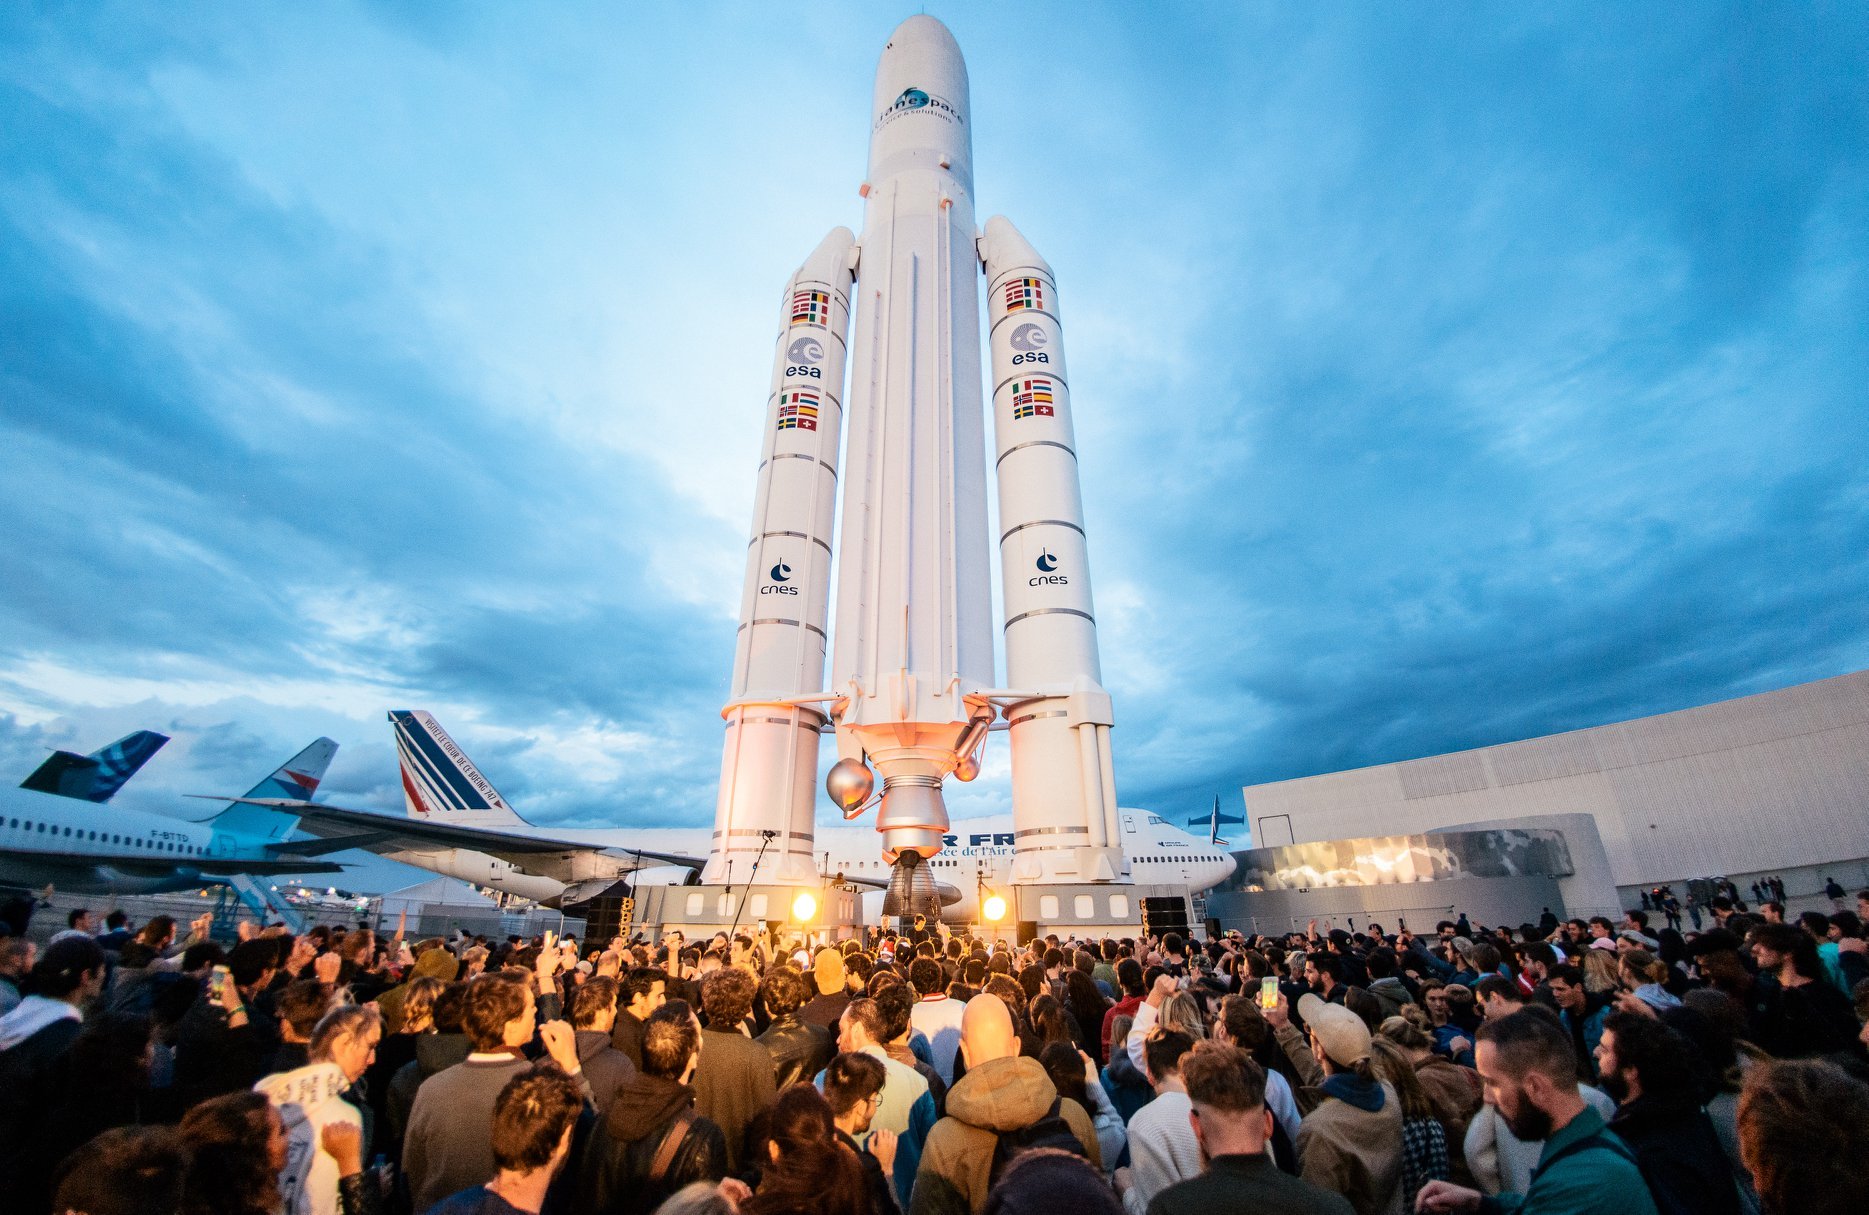 This Festival At An Actual Air and Space Museum Is Going To Be WILD [VIDEO]